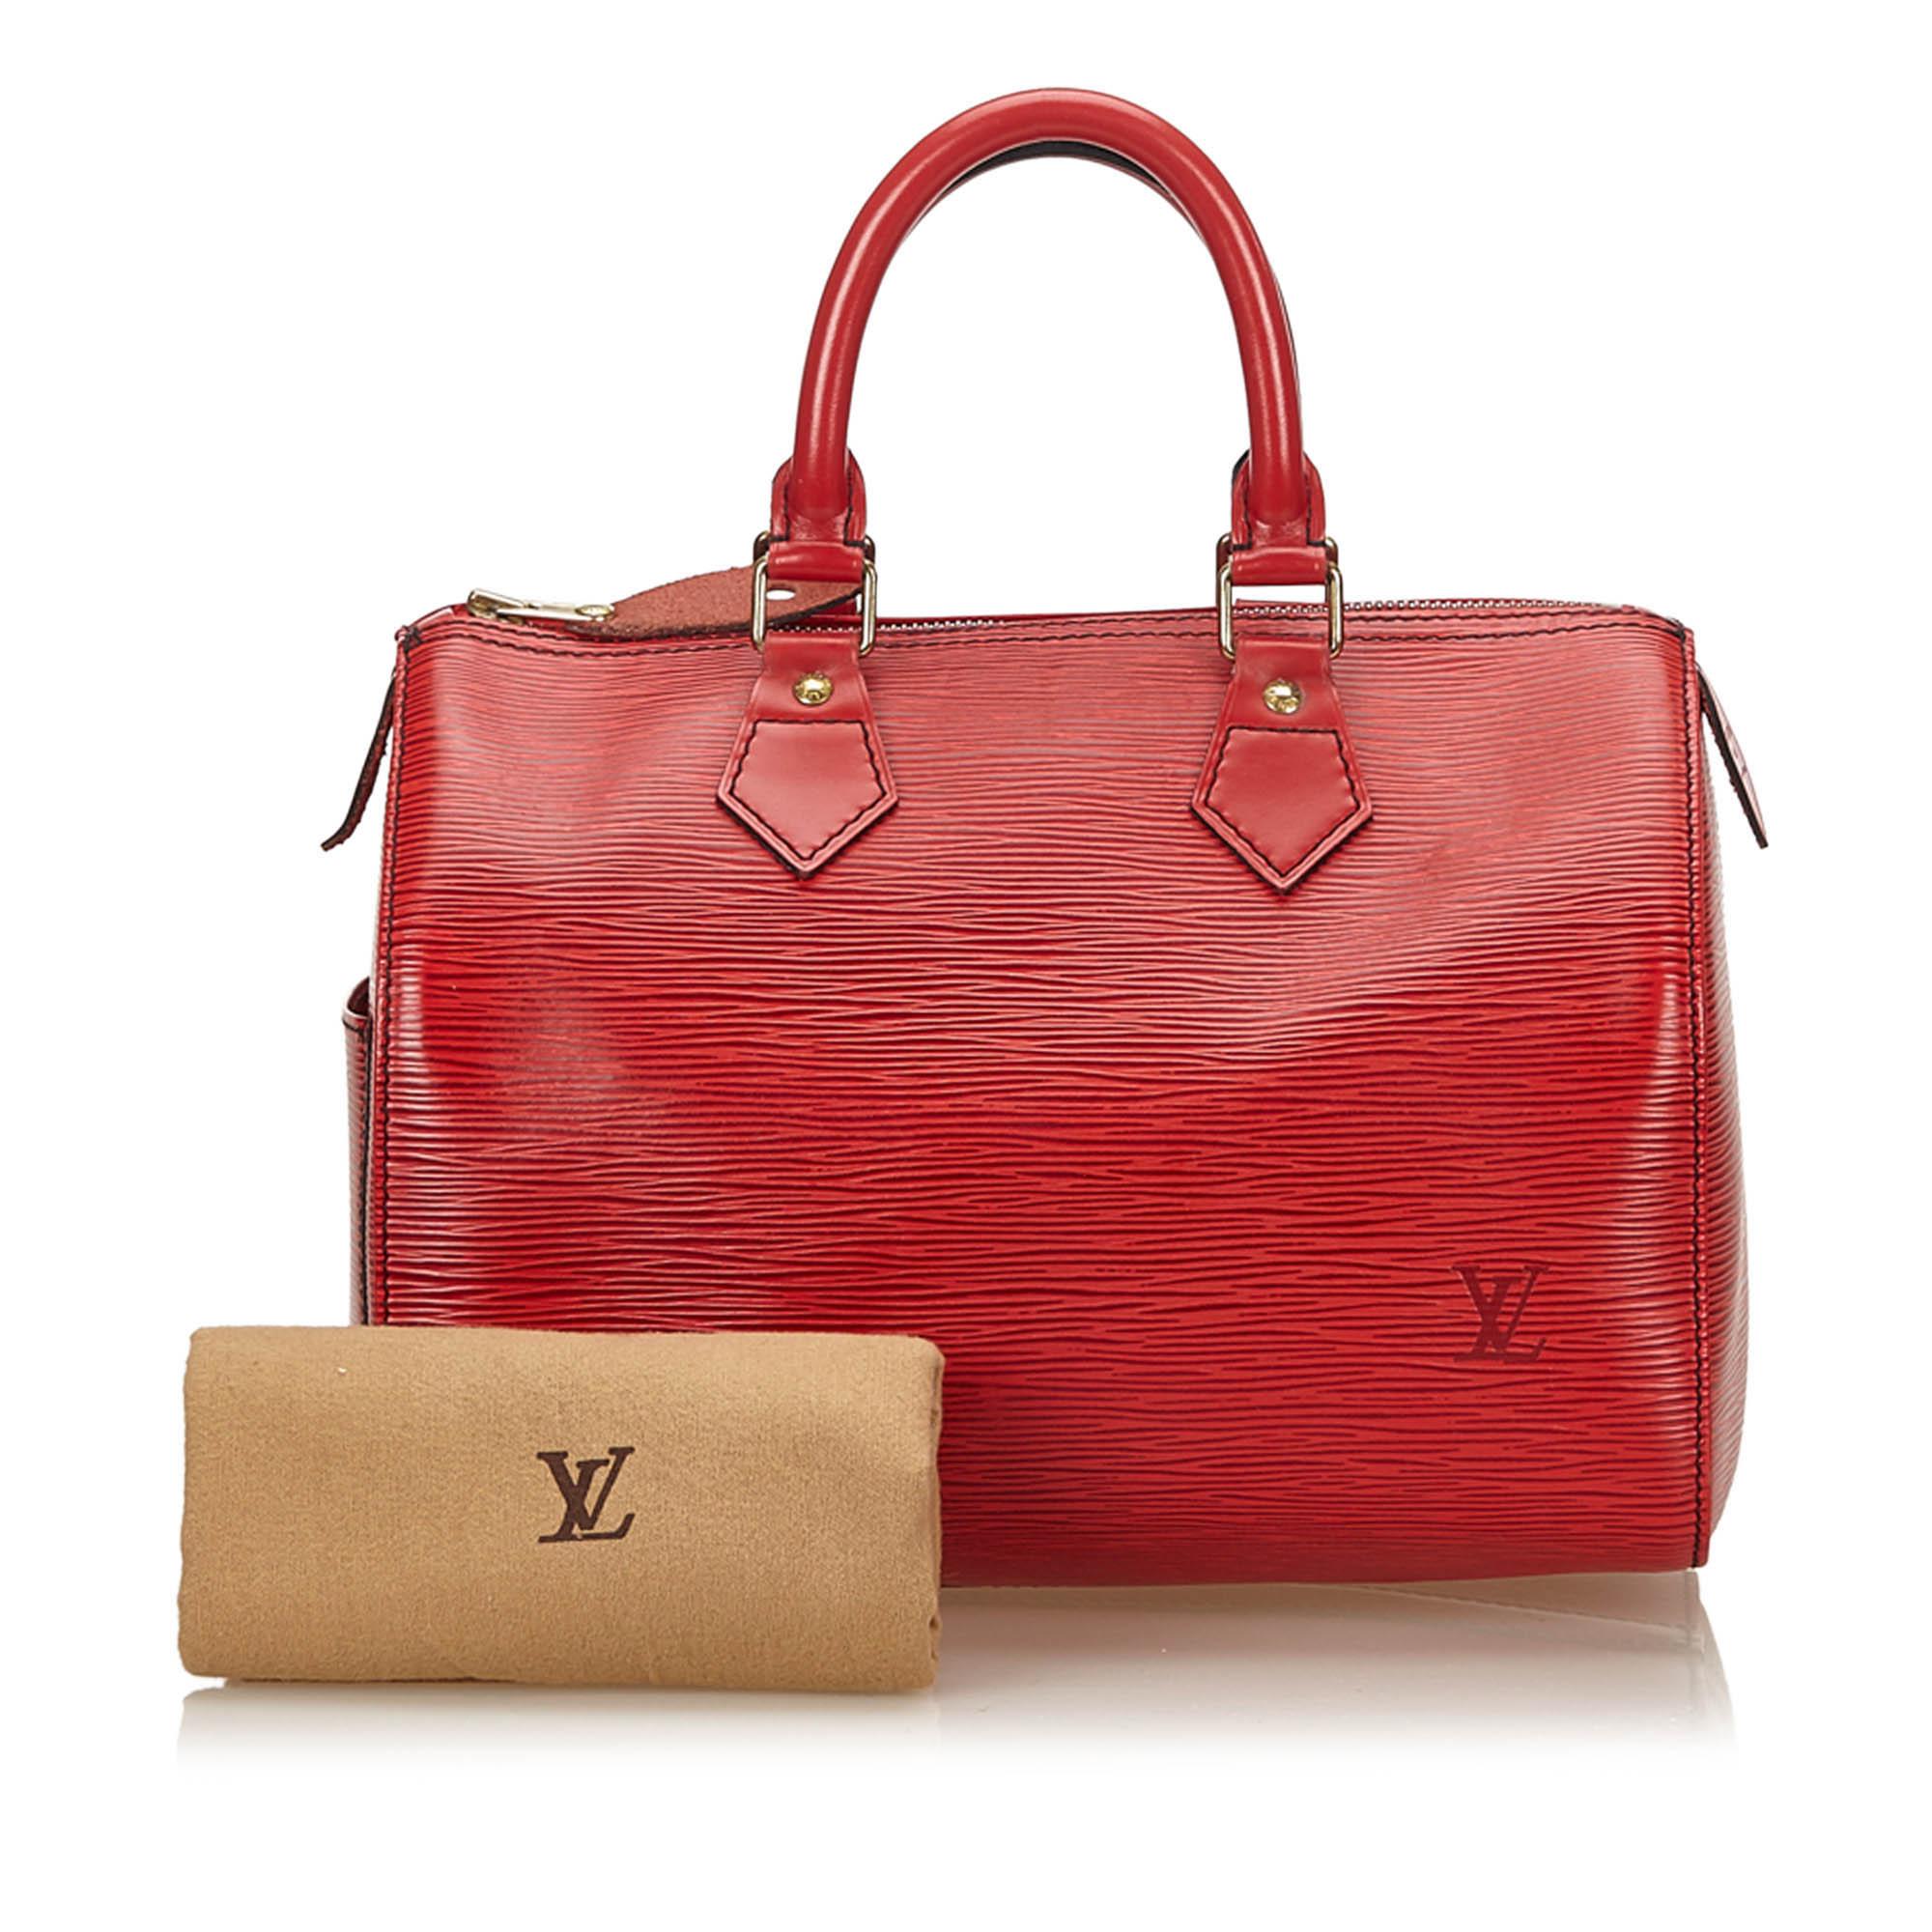 Louis Vuitton Epi Leather Speedy 30 Bag in Red - Lyst